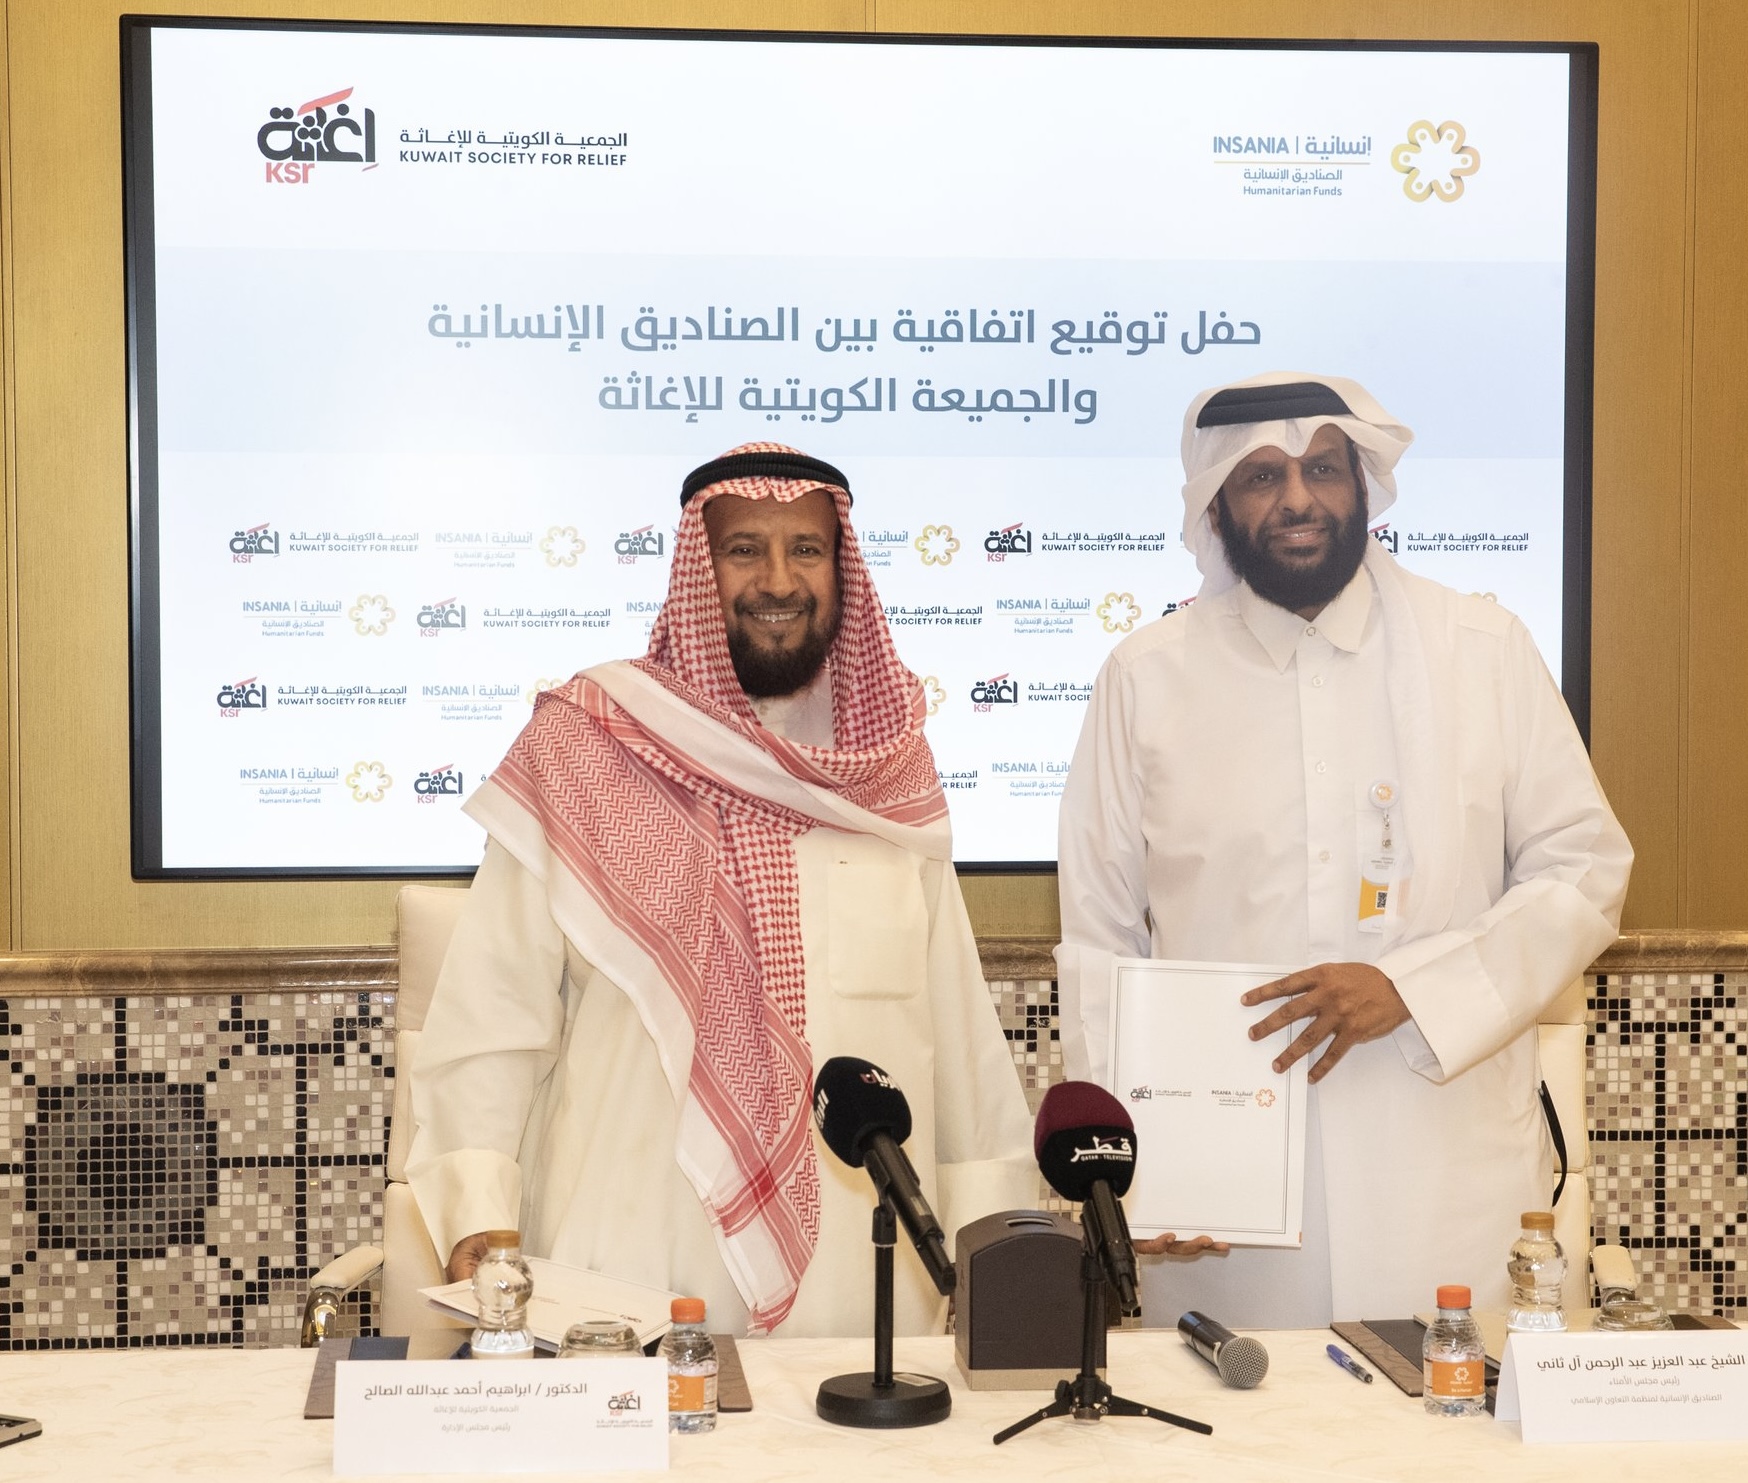 Doha-based OIC, Kuwait Society for Relief to boost regional humanitarian efforts